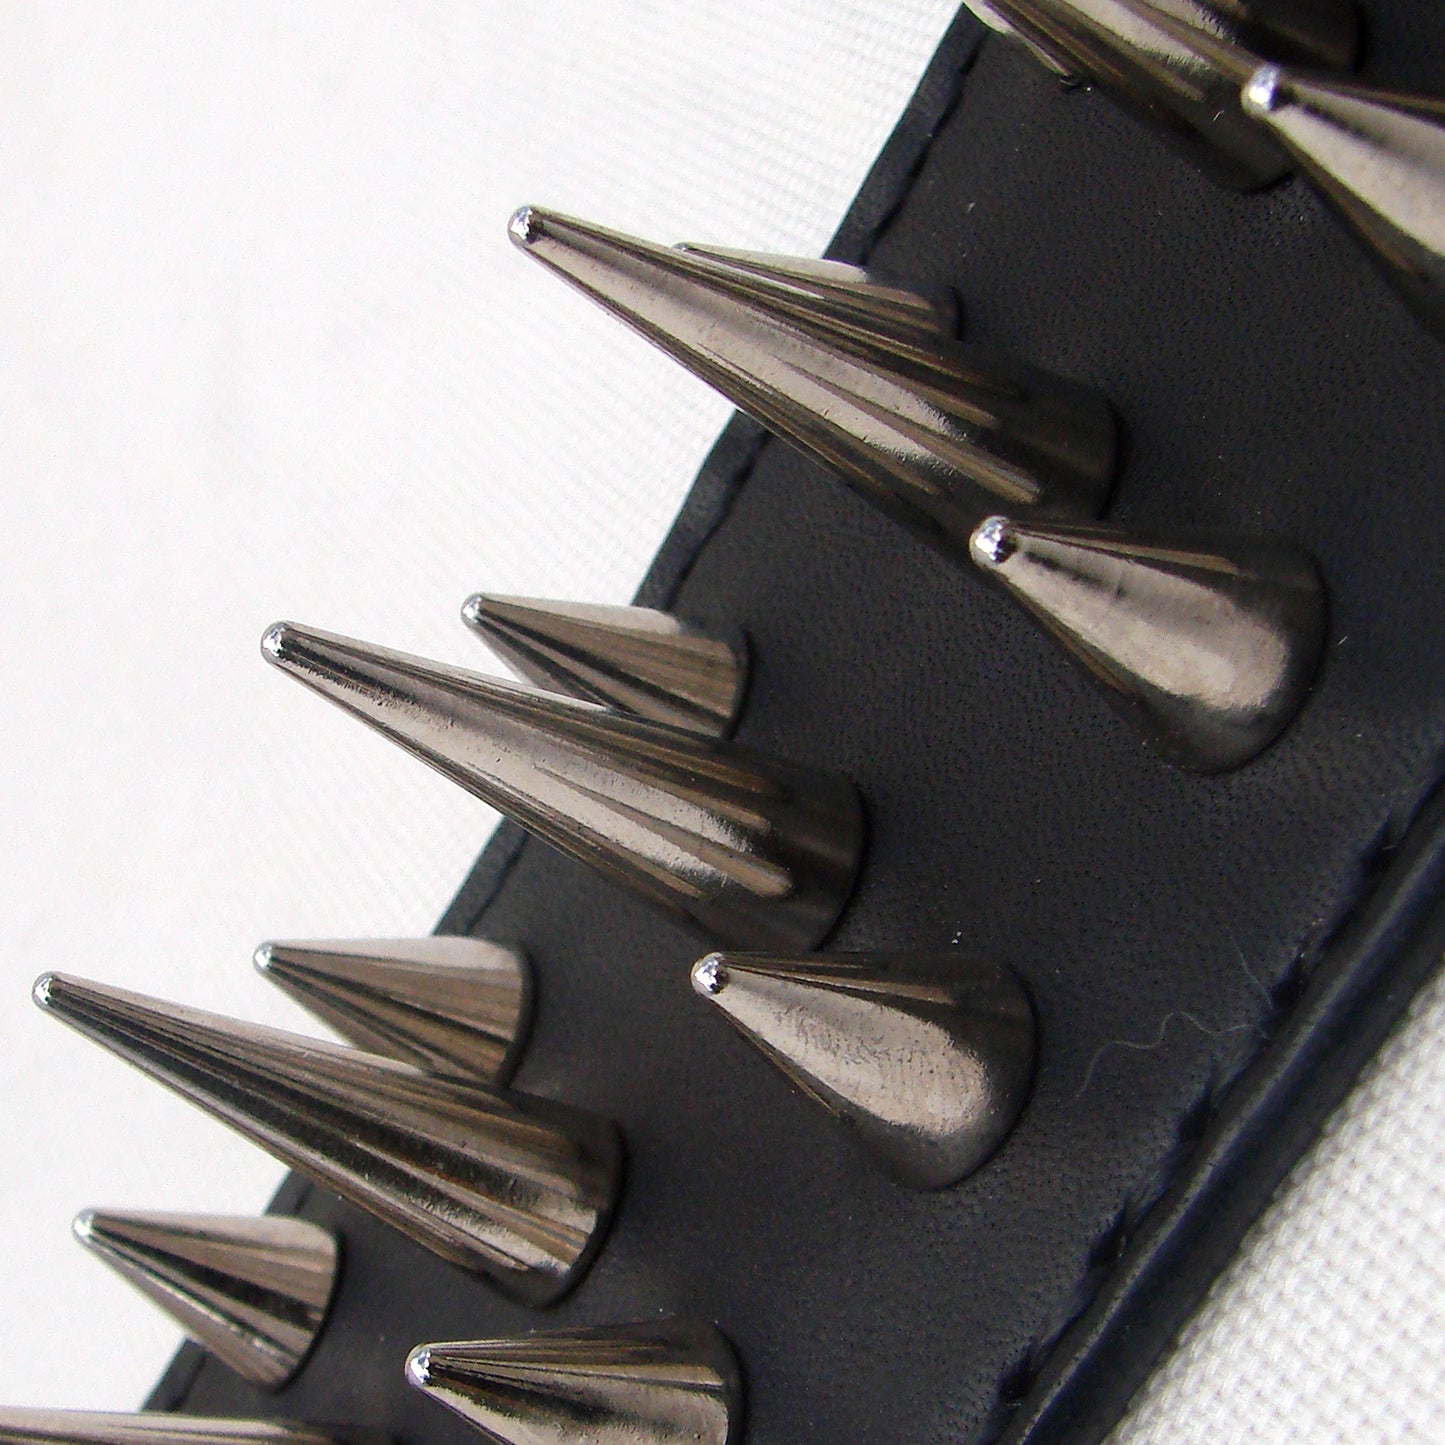 Black Leather Guitar Strap 3 rows of spikes